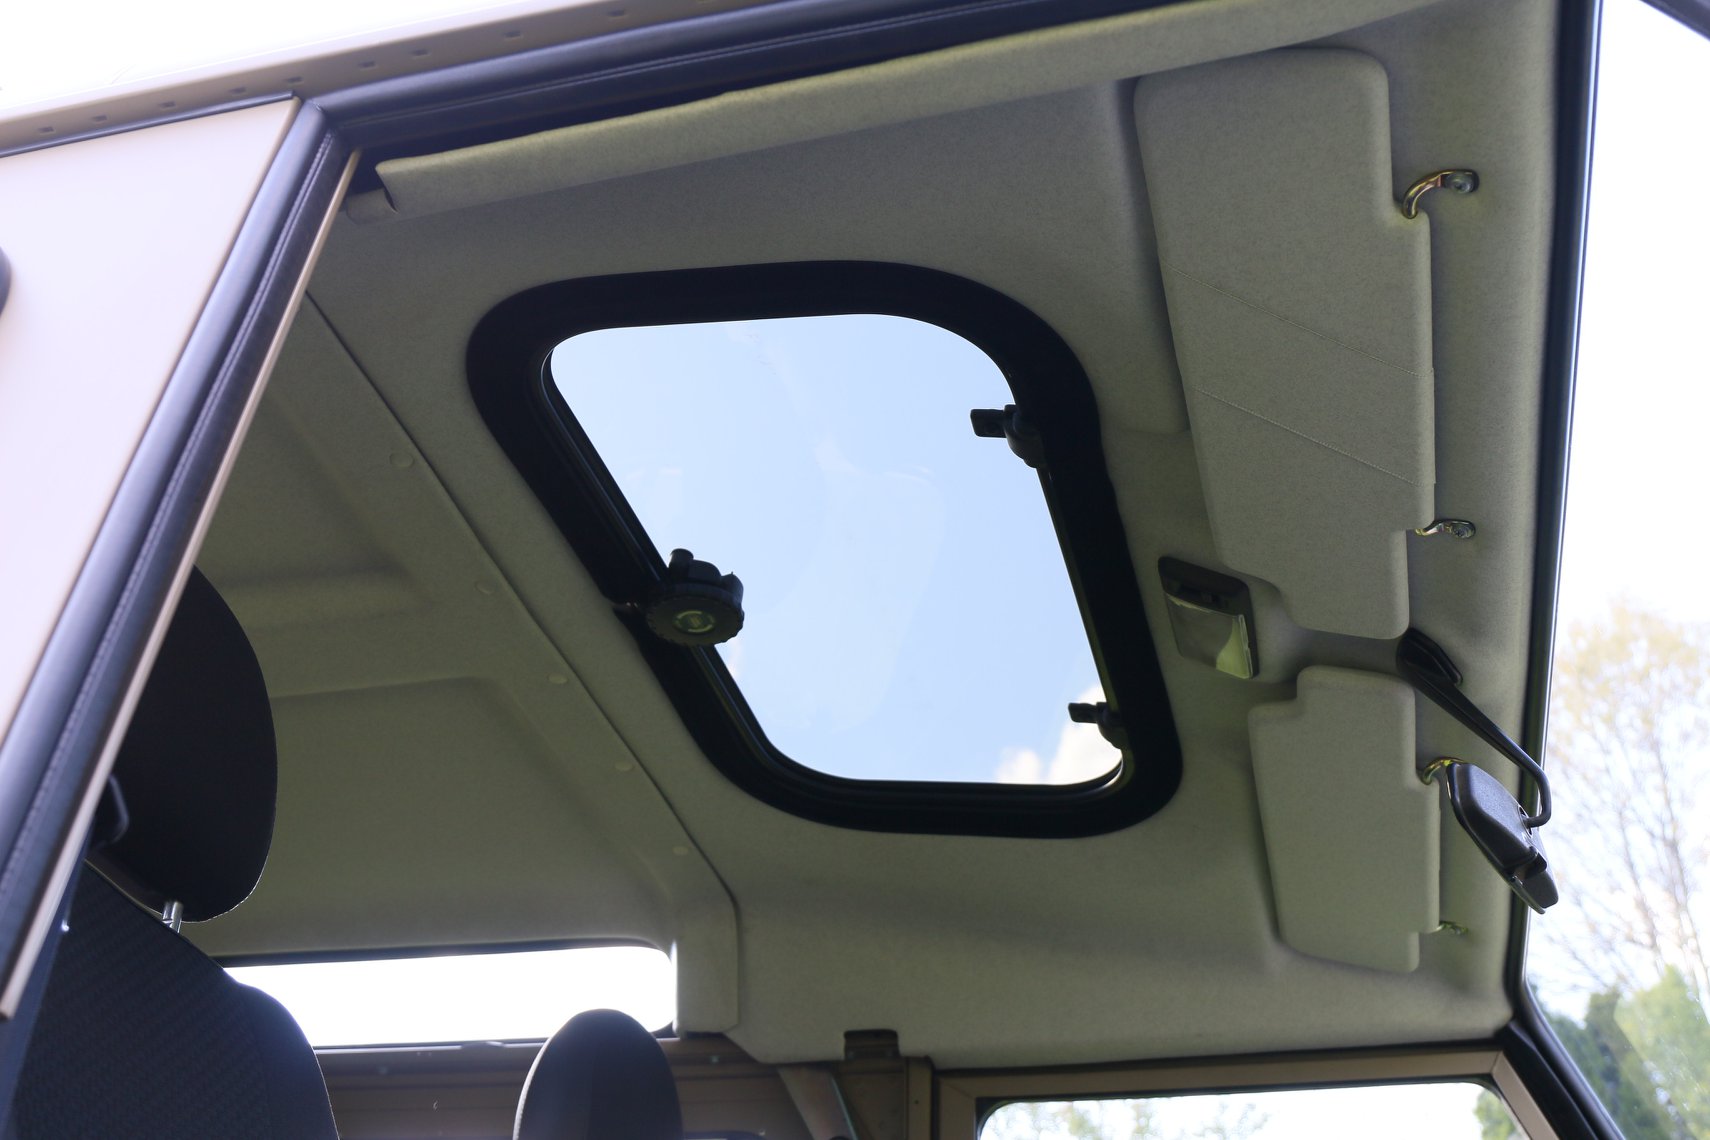 New headliner and sunroof on 1985 Land Rover Defender.